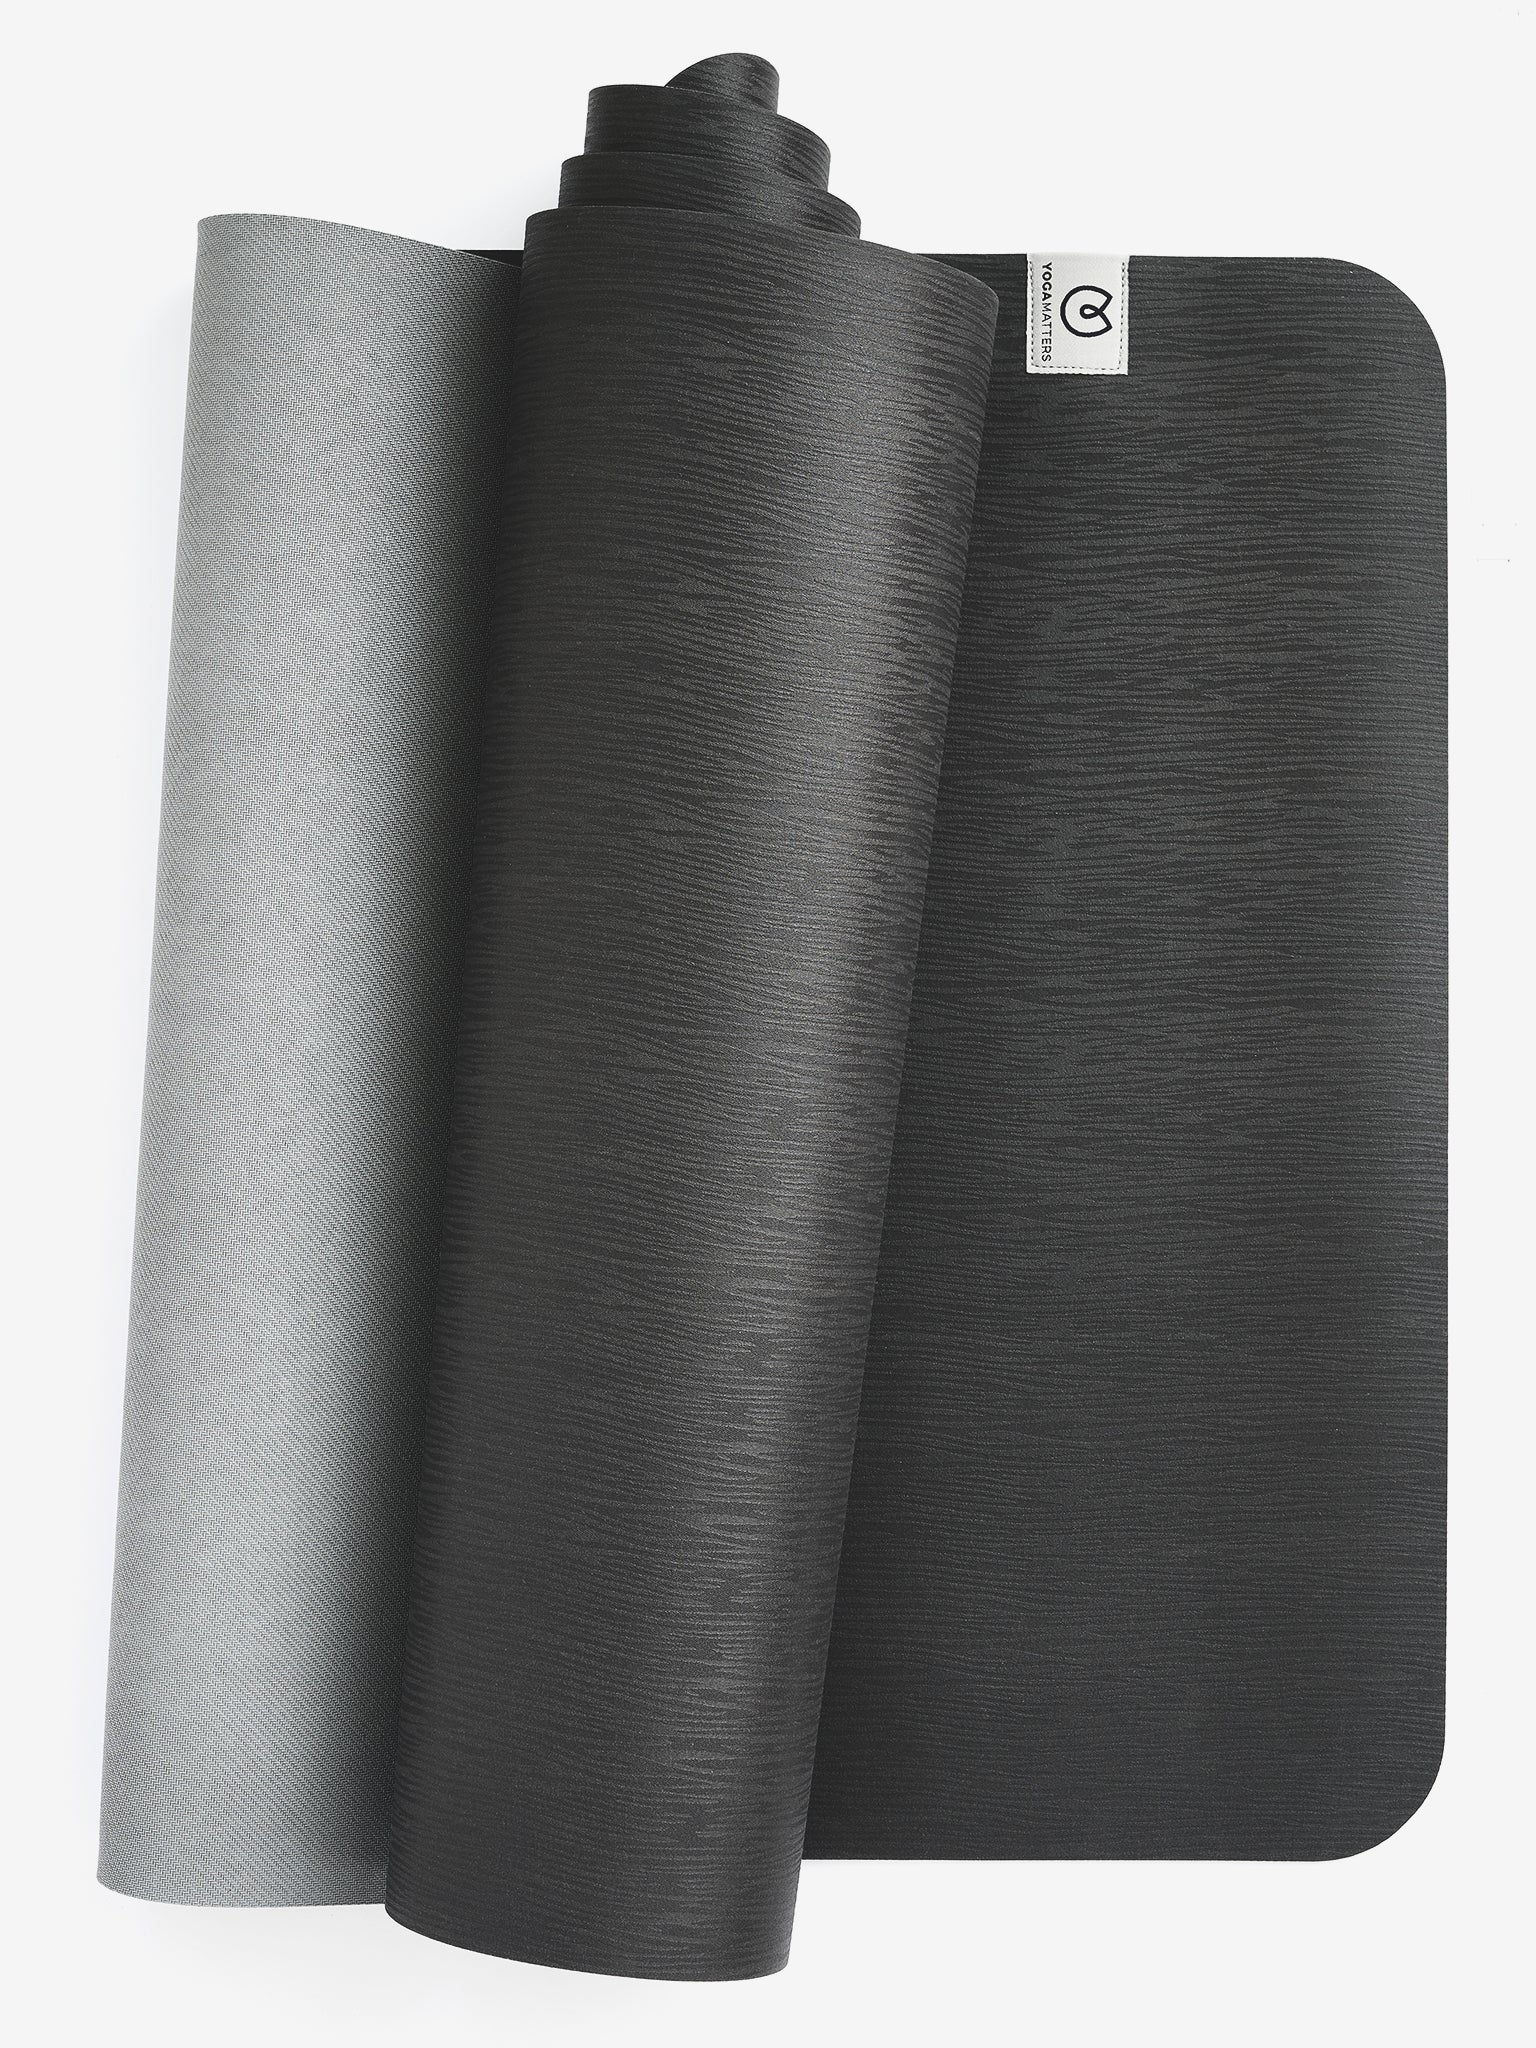 Two-tone gray premium yoga mat rolled halfway, textured non-slip surface, durable eco-friendly exercise mat, front-side view showing brand logo.